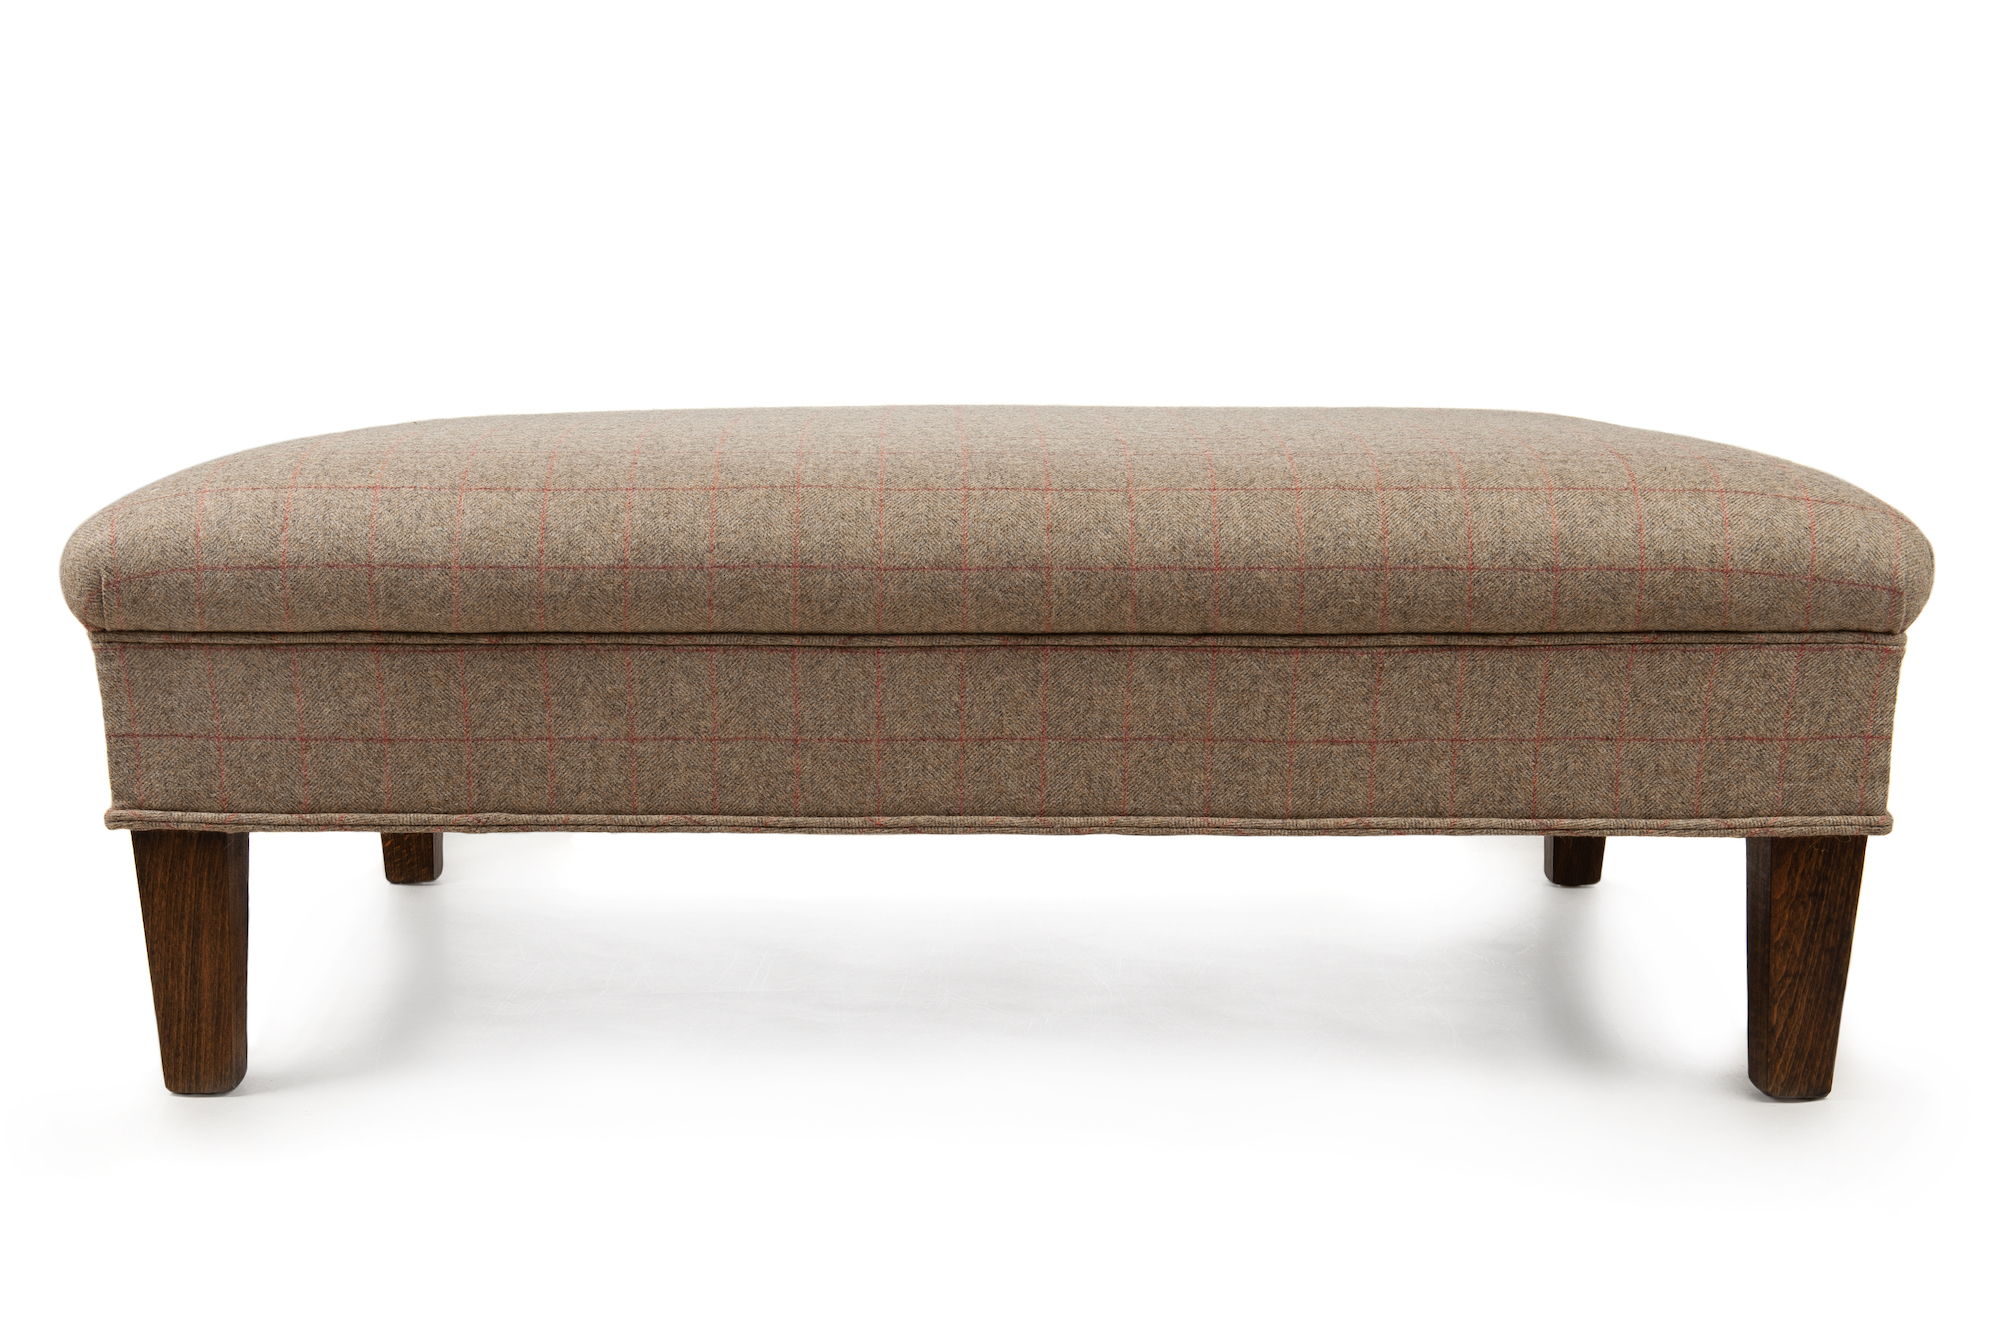 Roll Top Footstool in Herringbone Tweed with Double Piping and Tapering legs